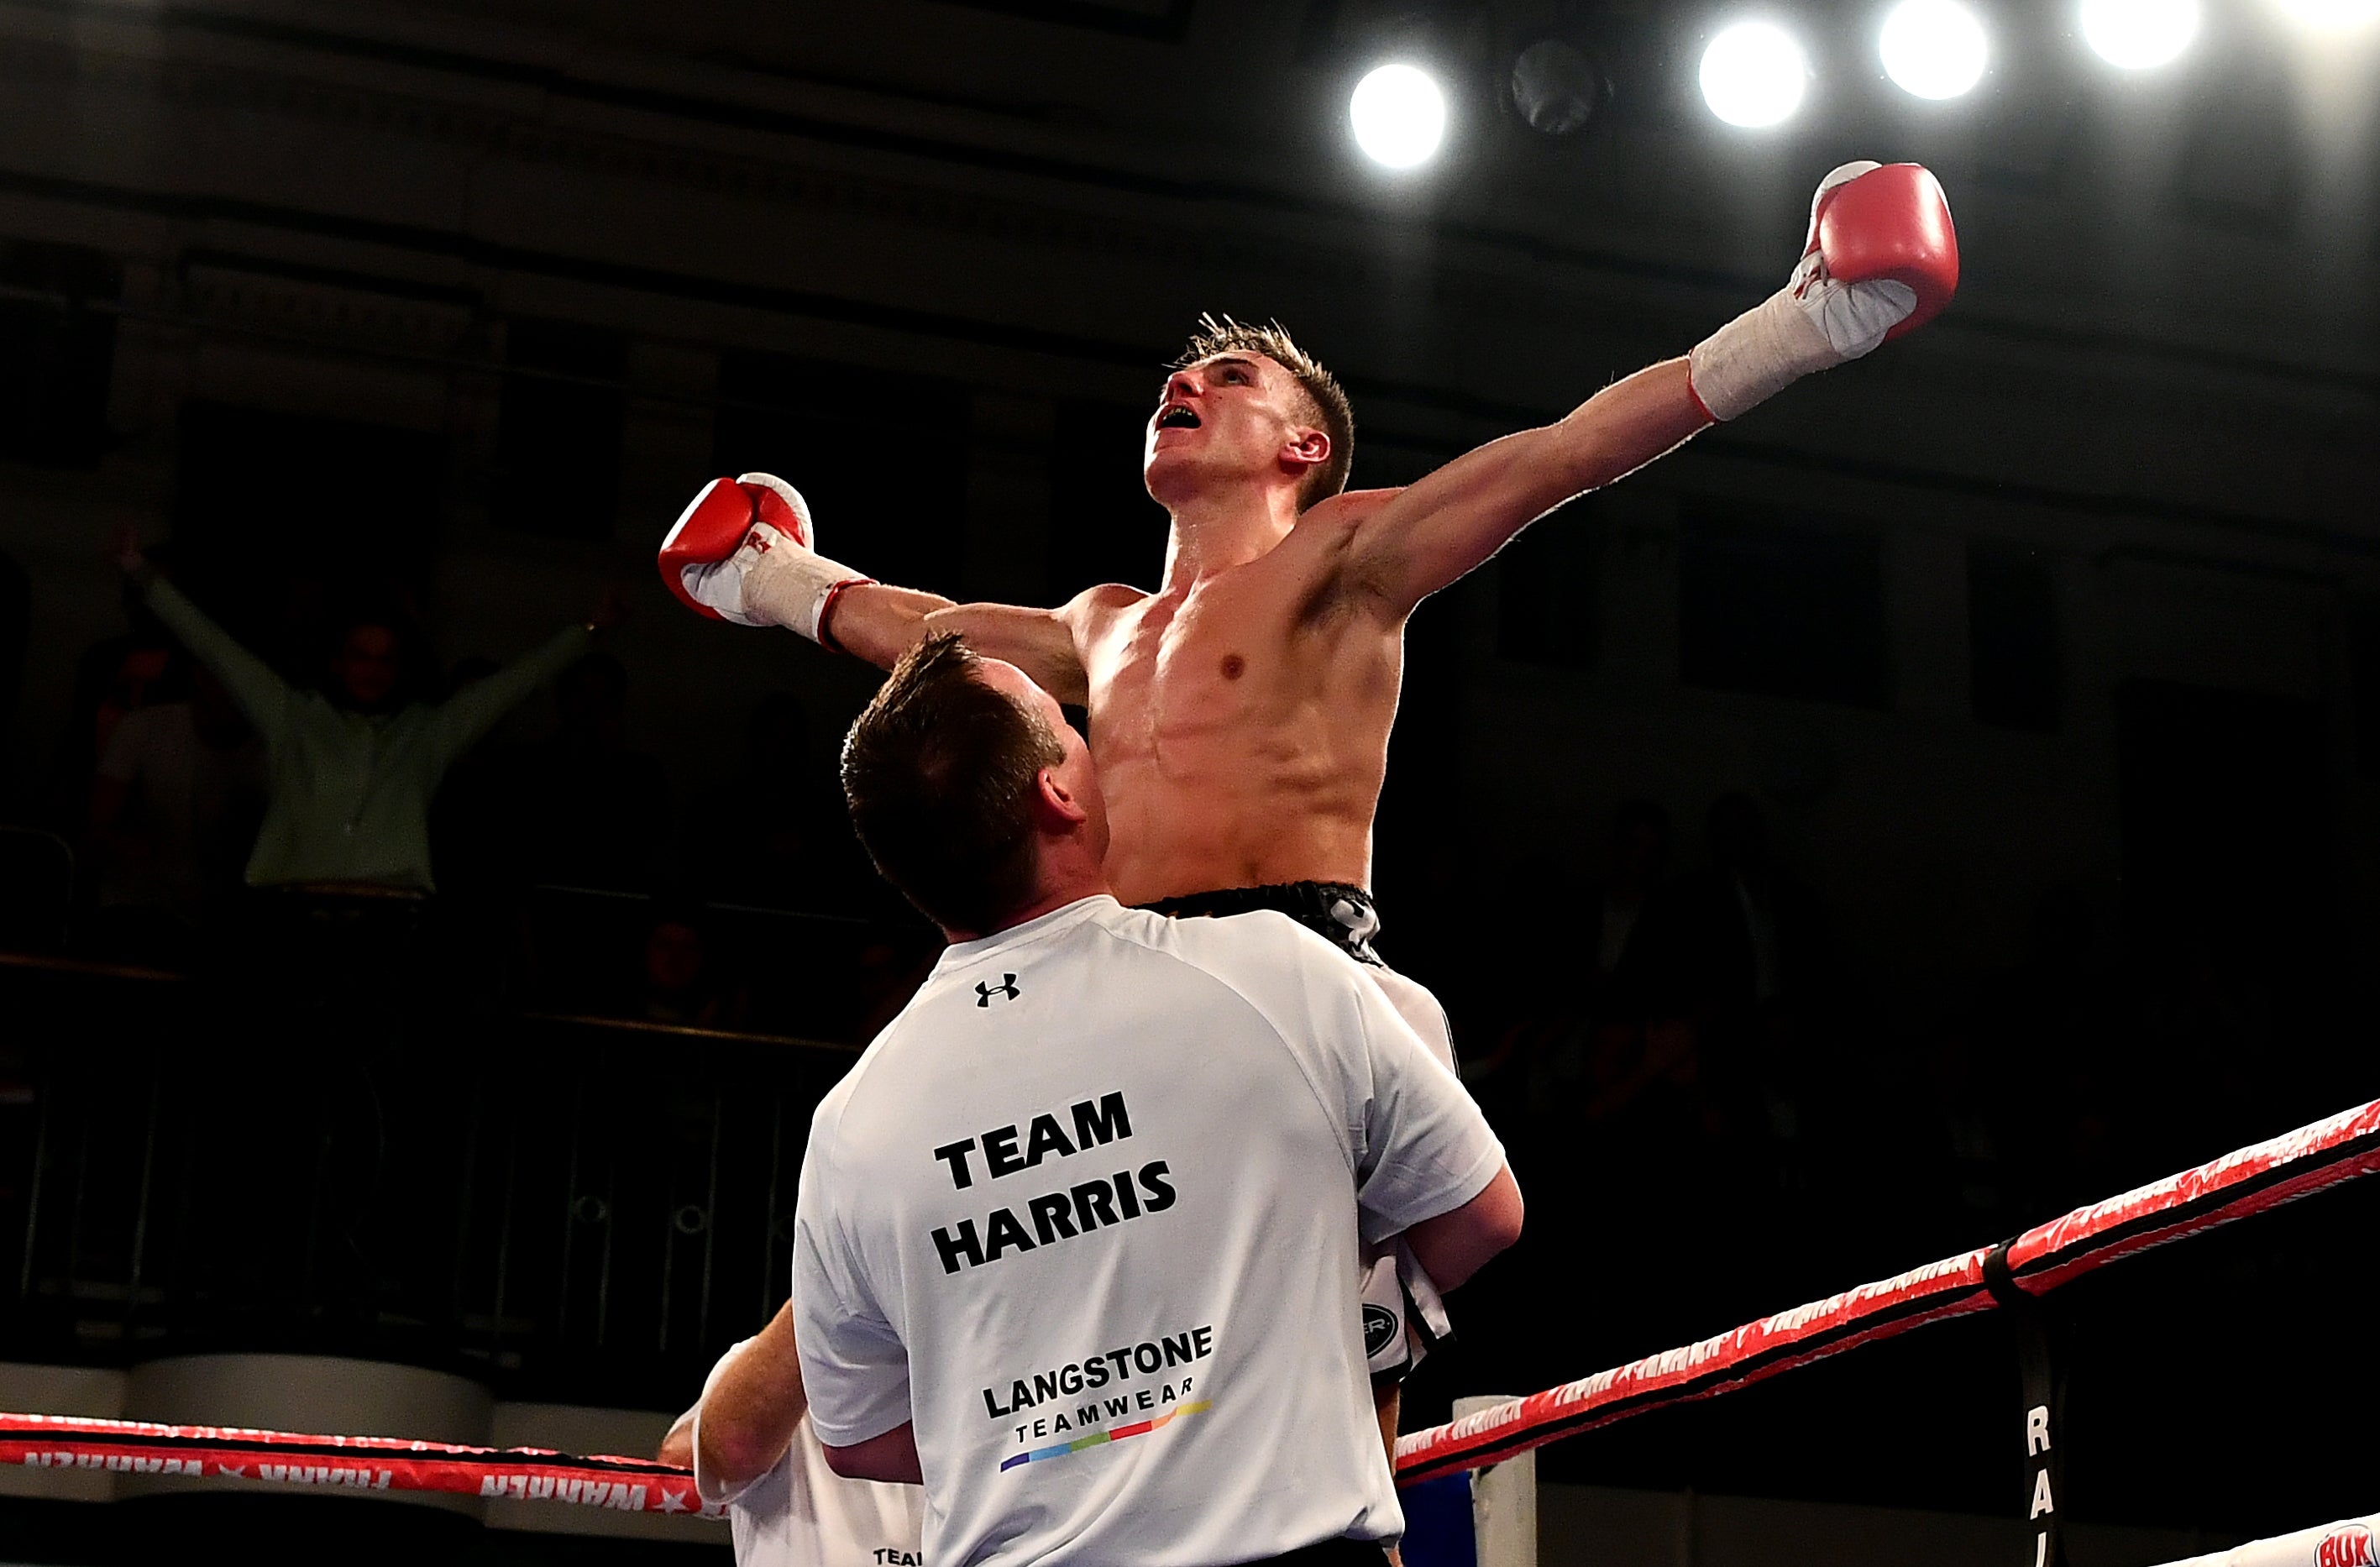 Jay Harris is taking on Connor Butler in Liverpool this weekend